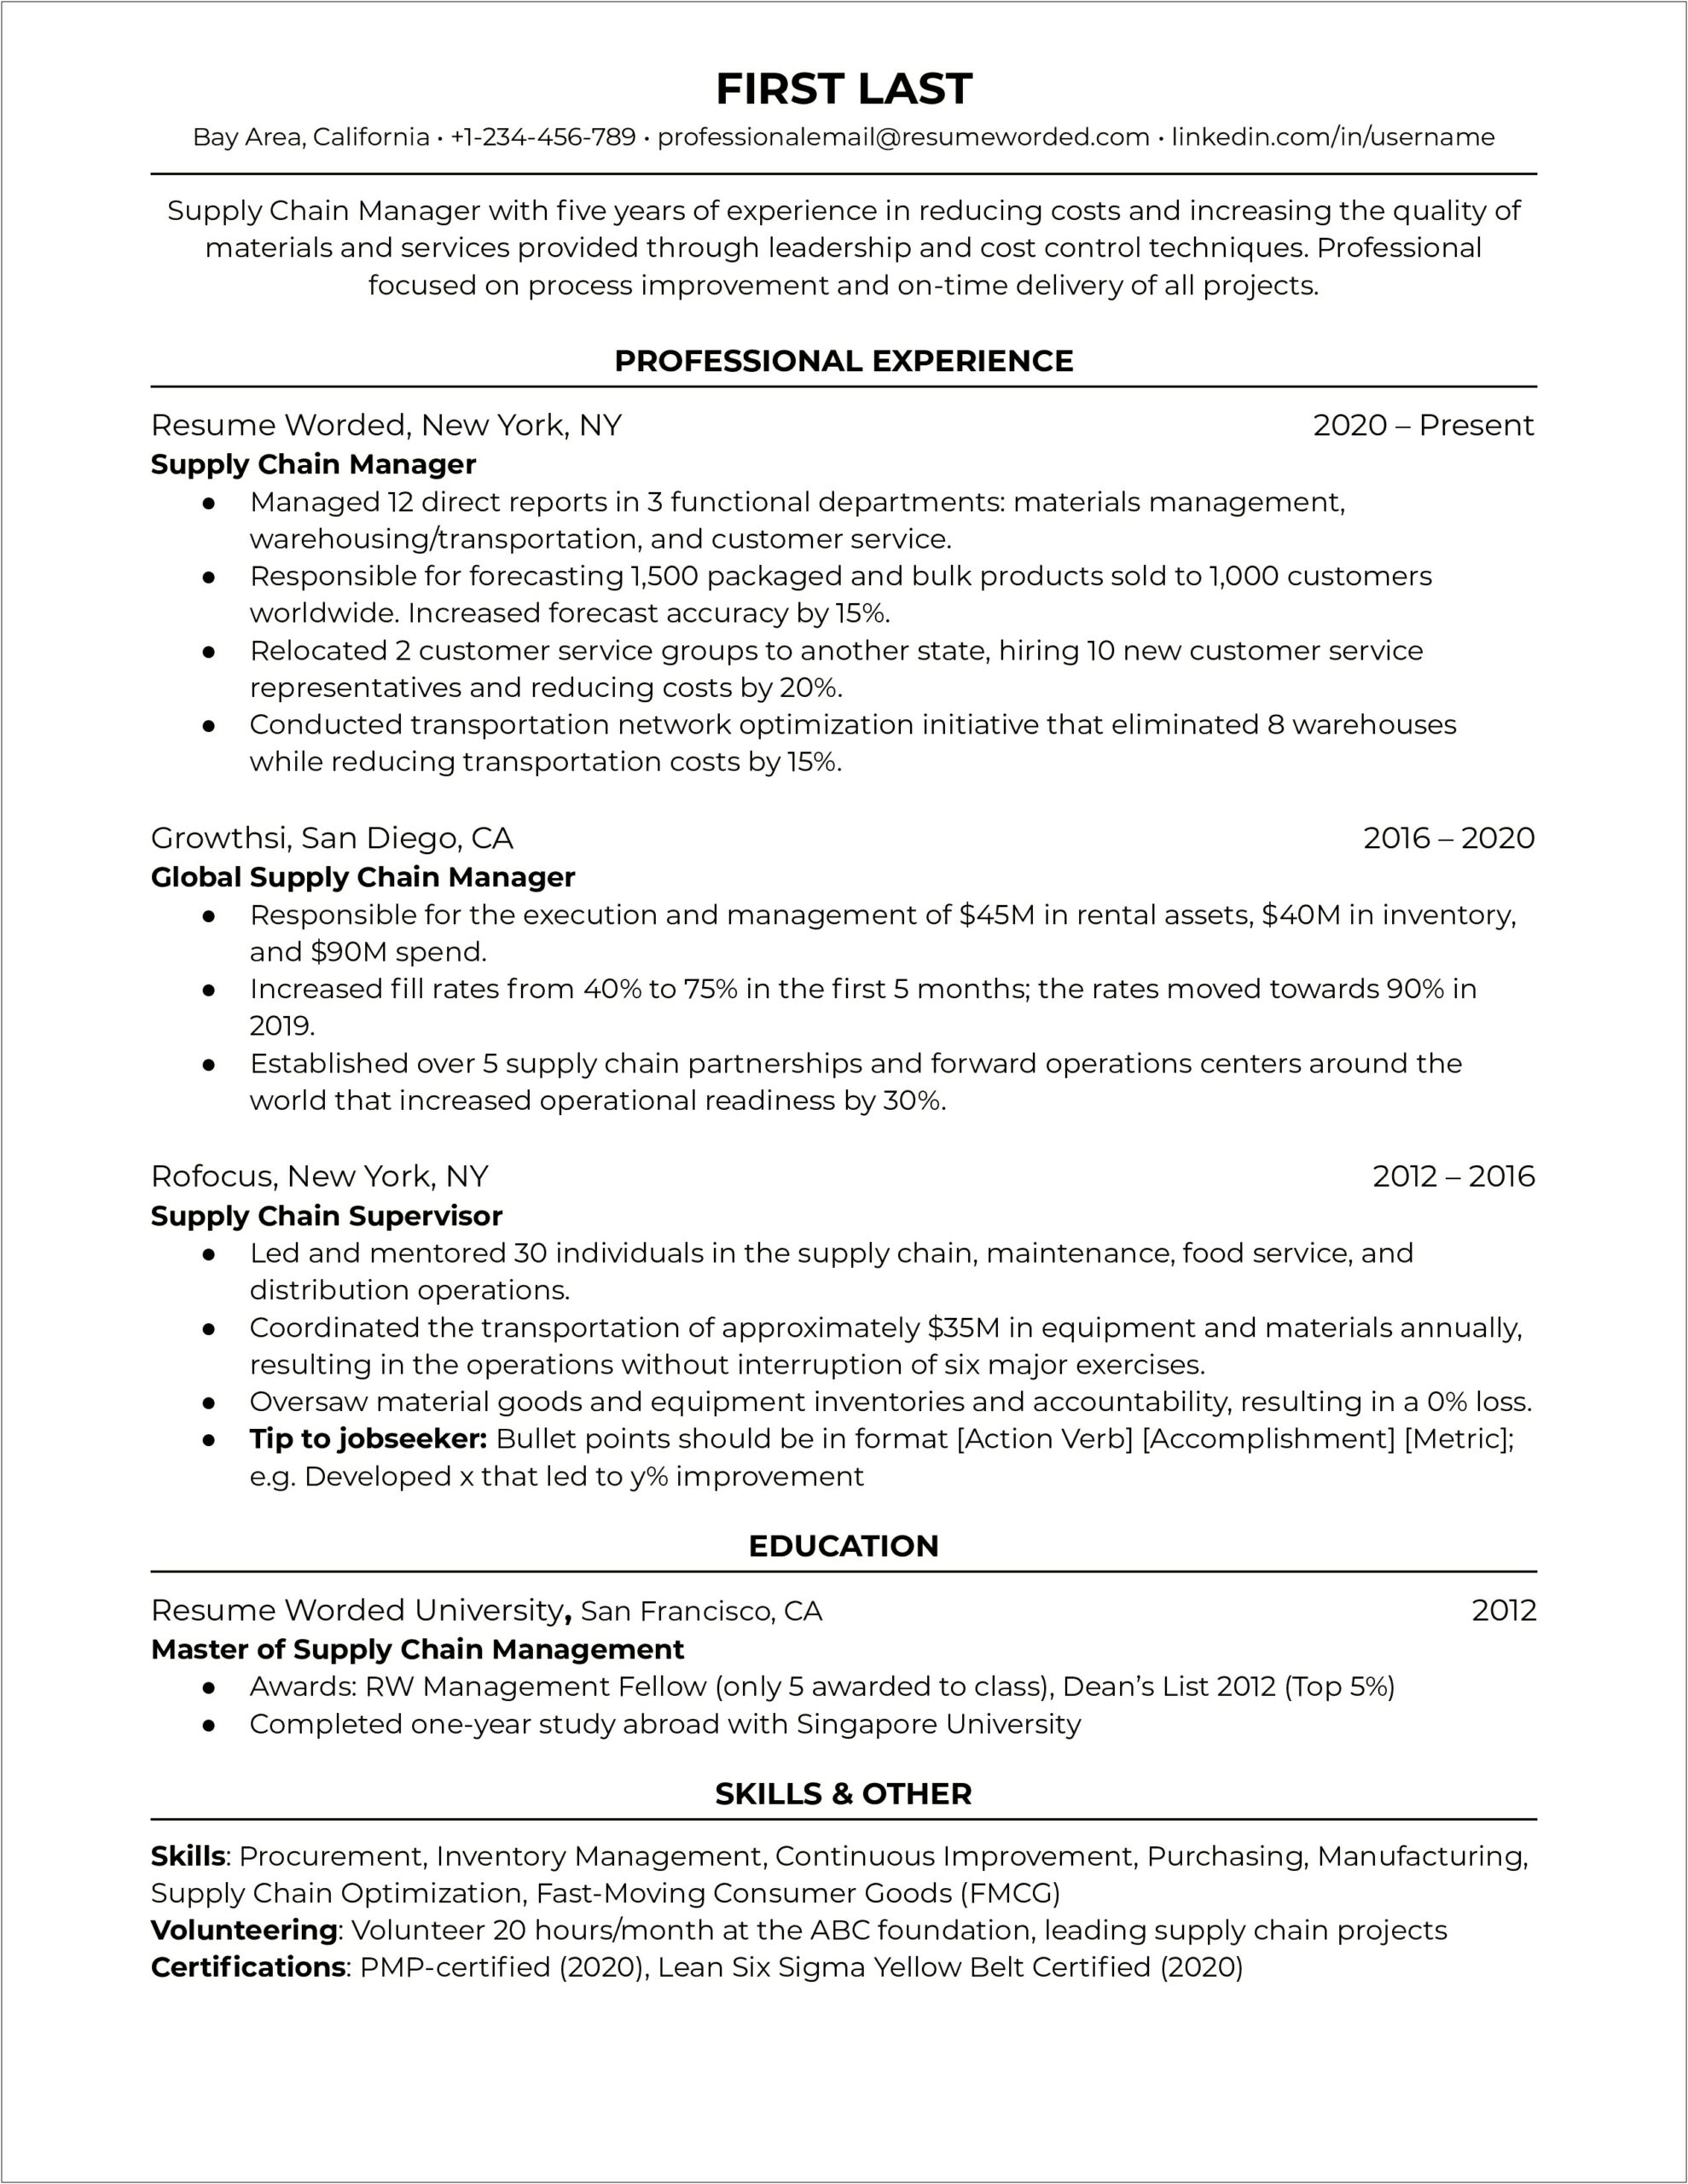 Supply Chain Management Executive Resume